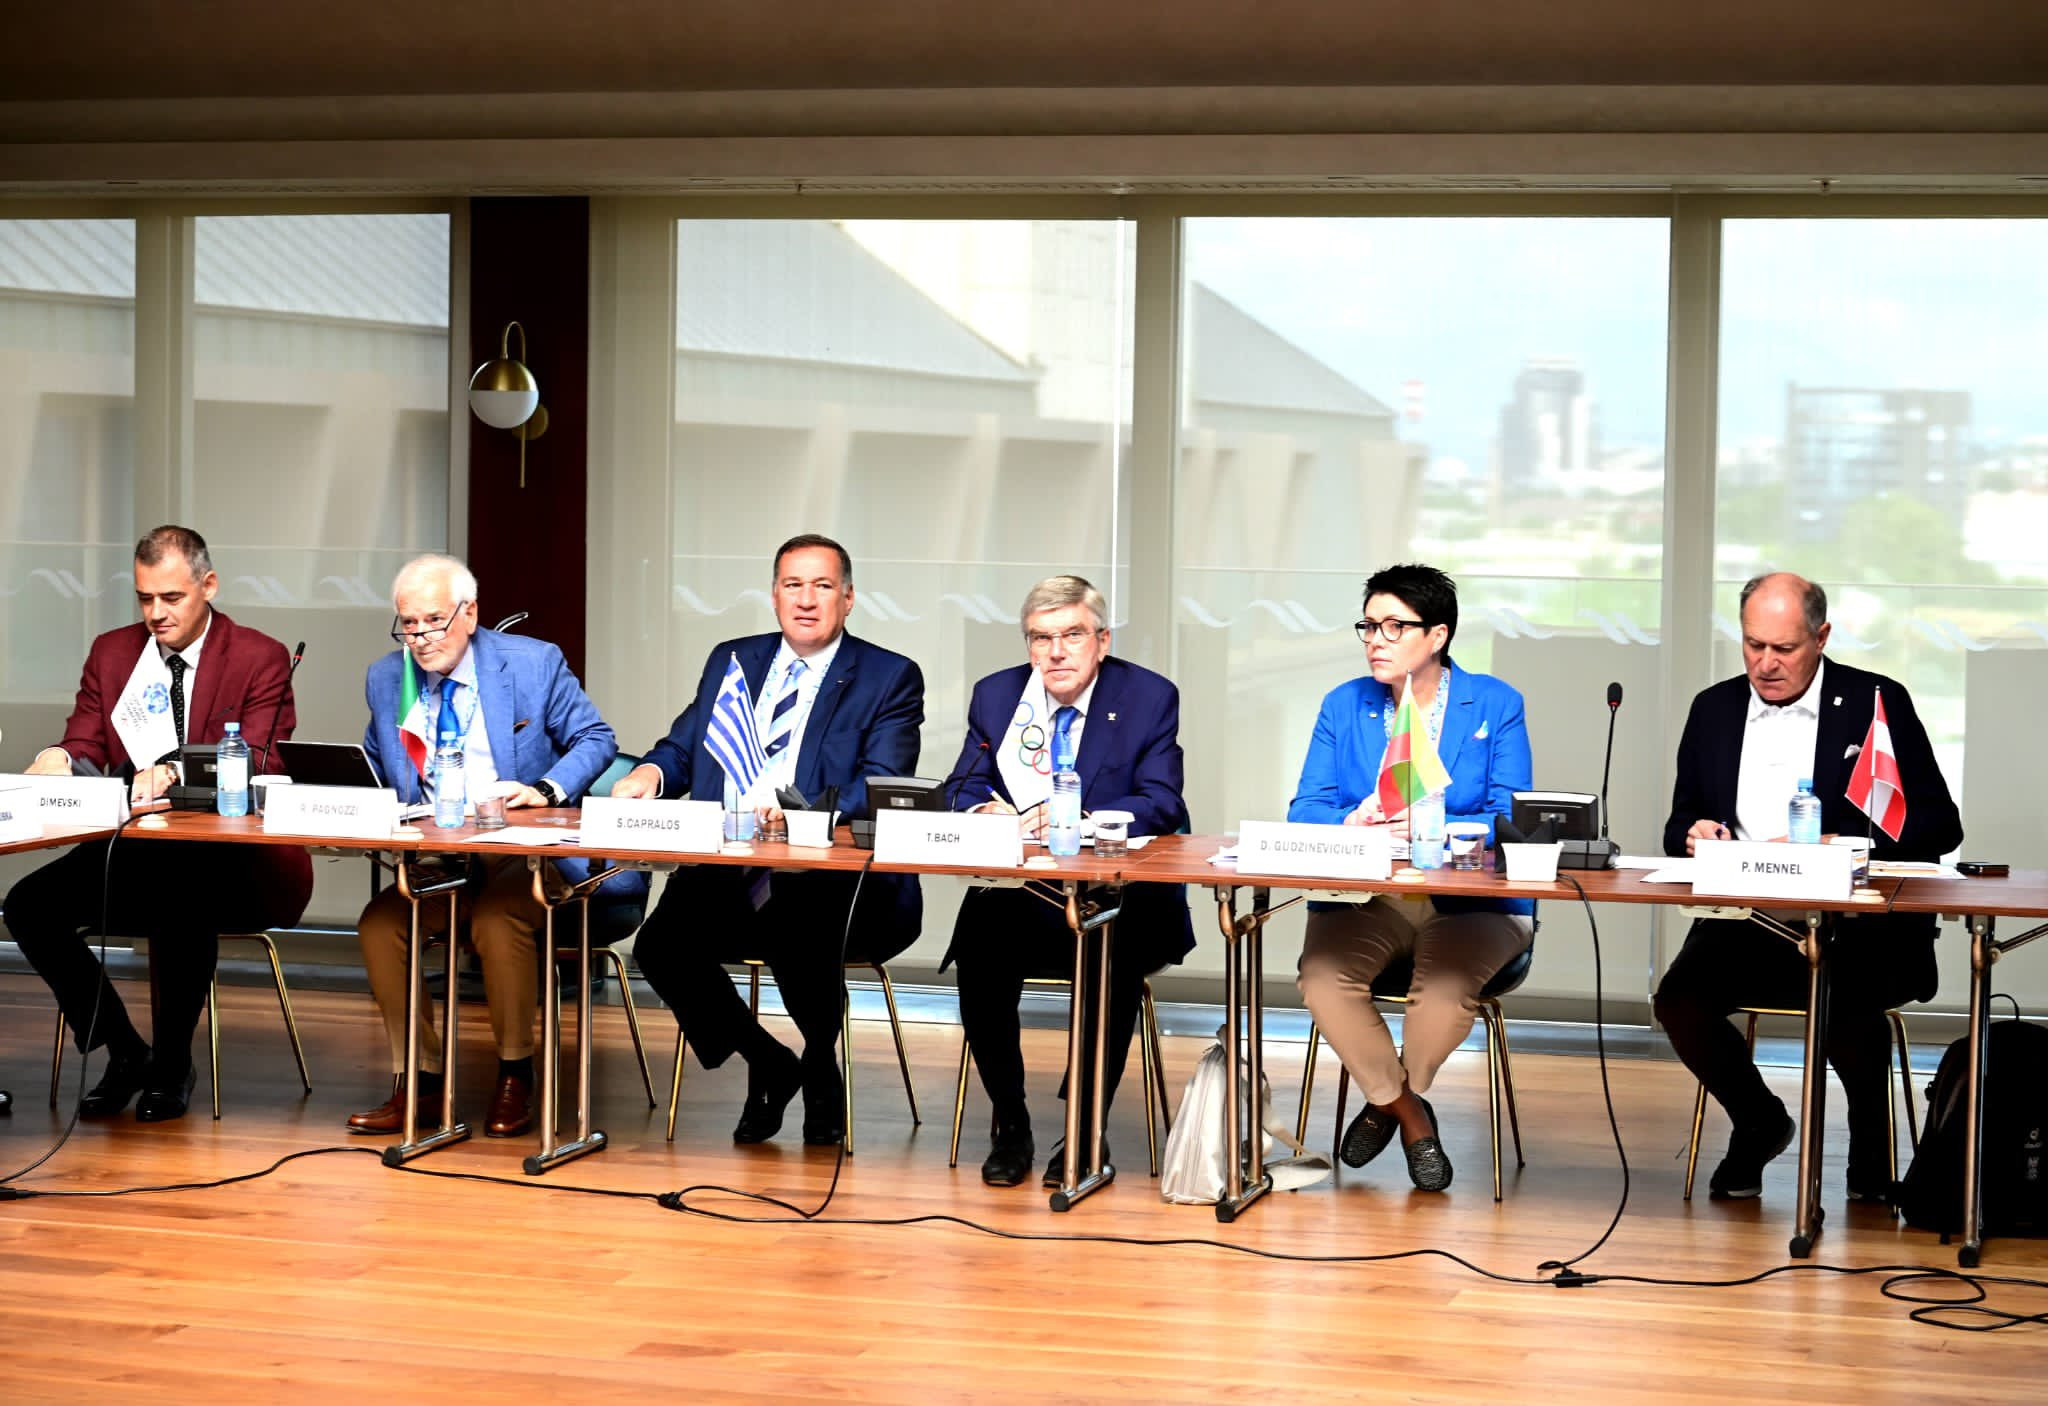 EOC President Spyros Capralos, third left, and his IOC counterpart Thomas Bach, third right, are among the speakers at tomorrow's General Assembly in Skopje ©EOC